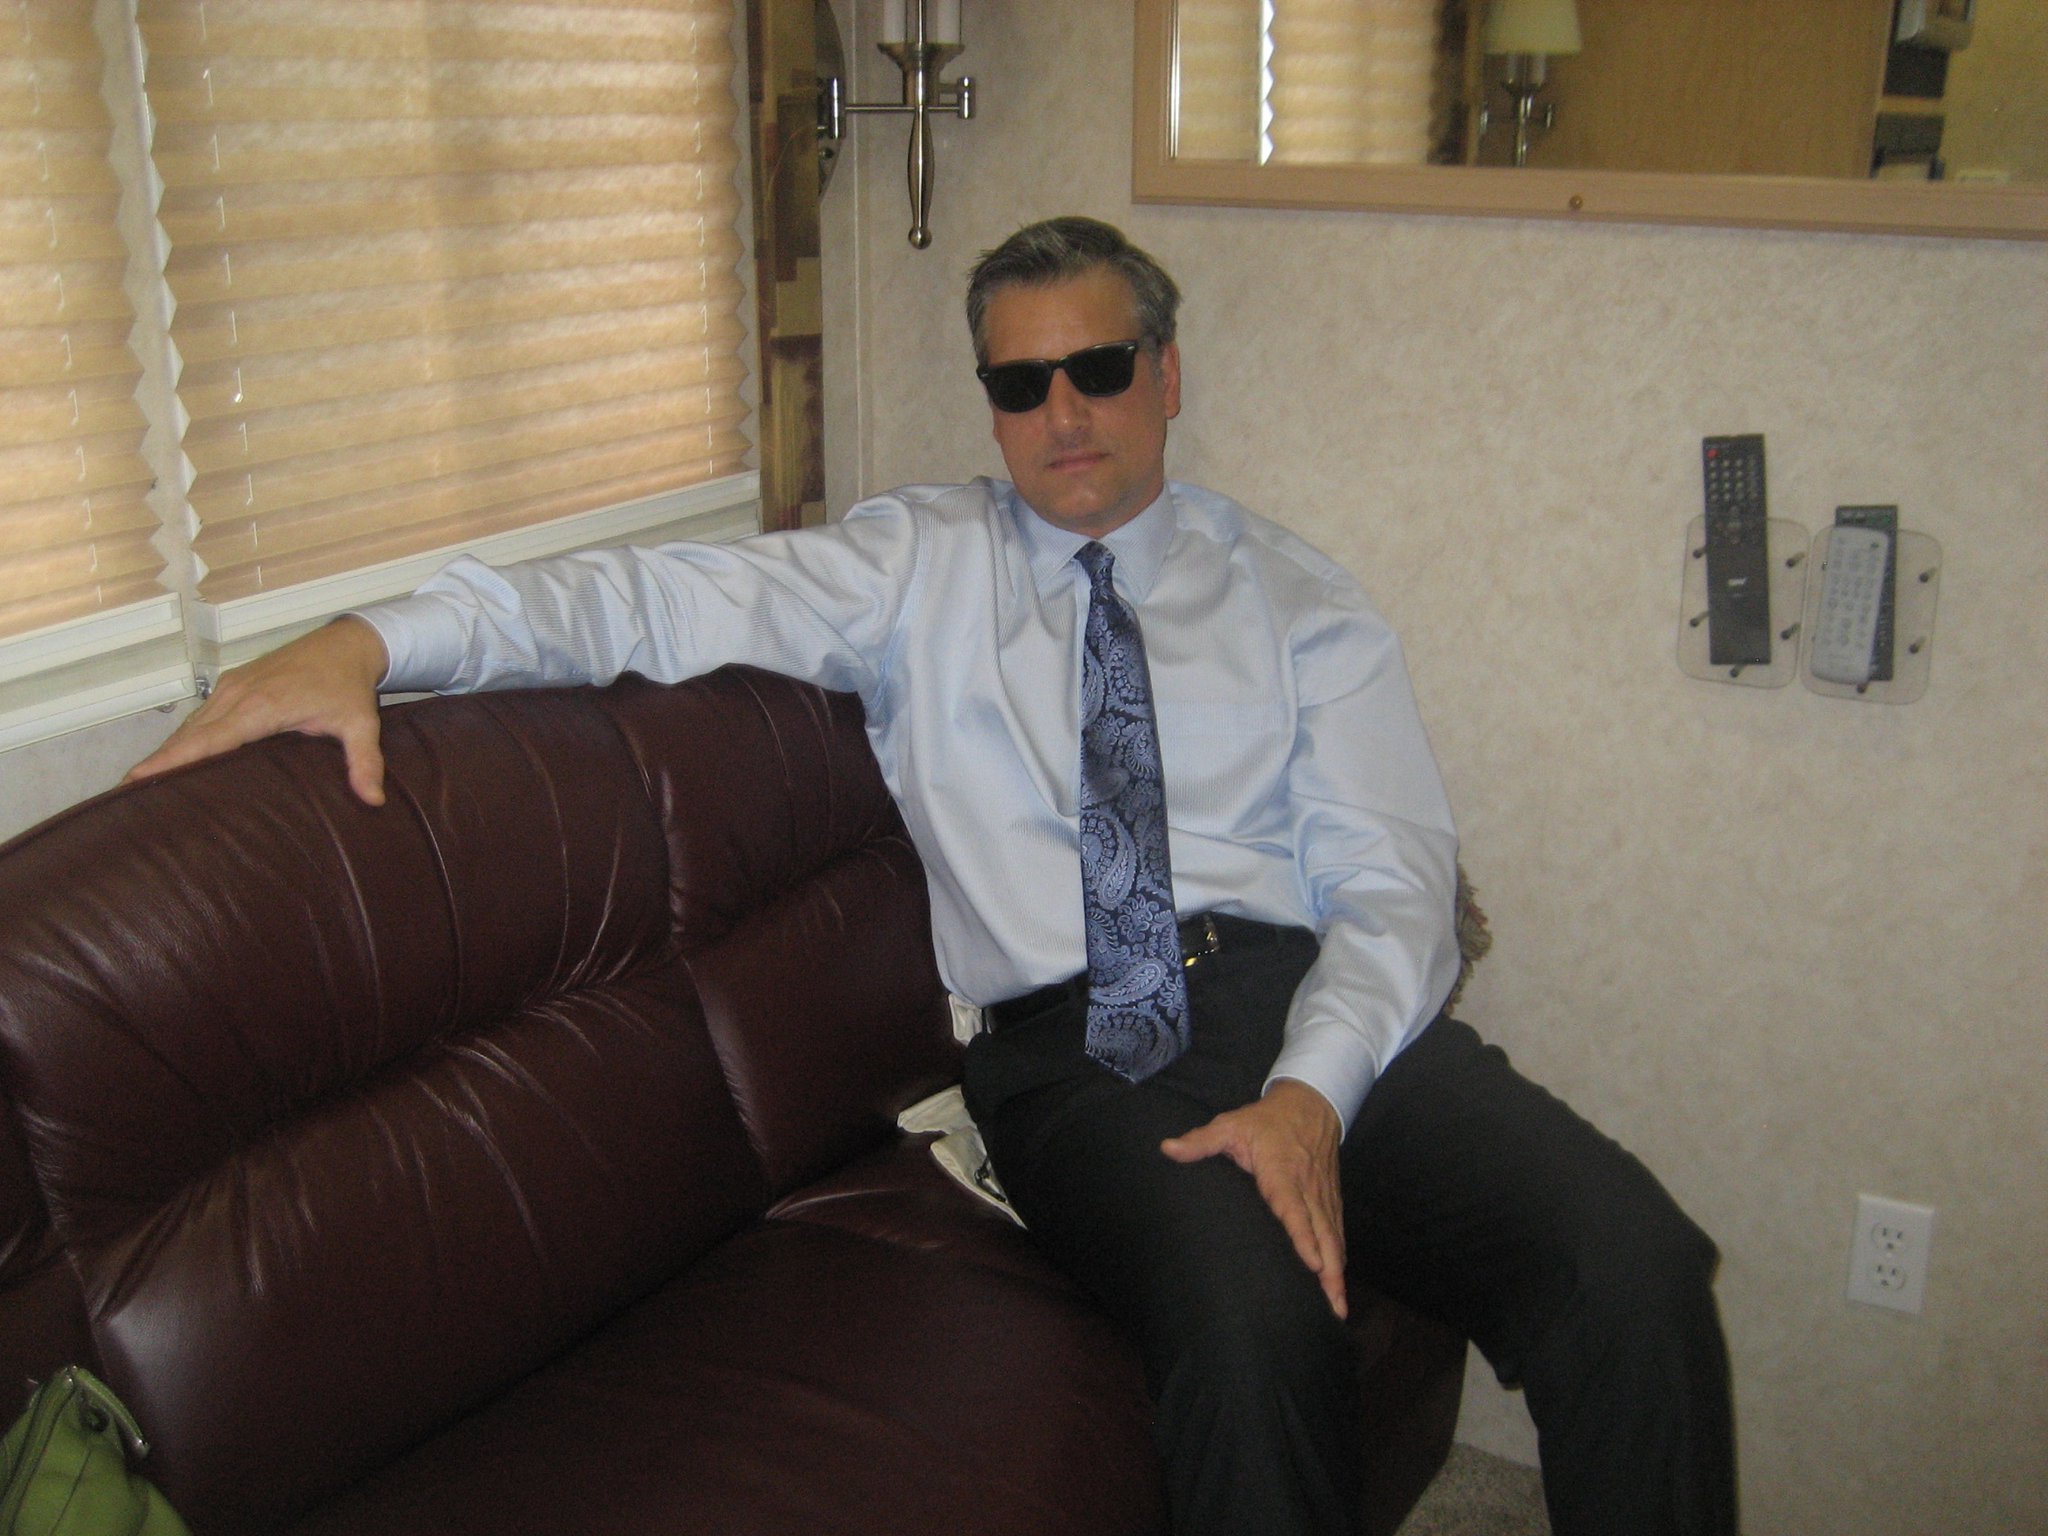 In my trailer at 